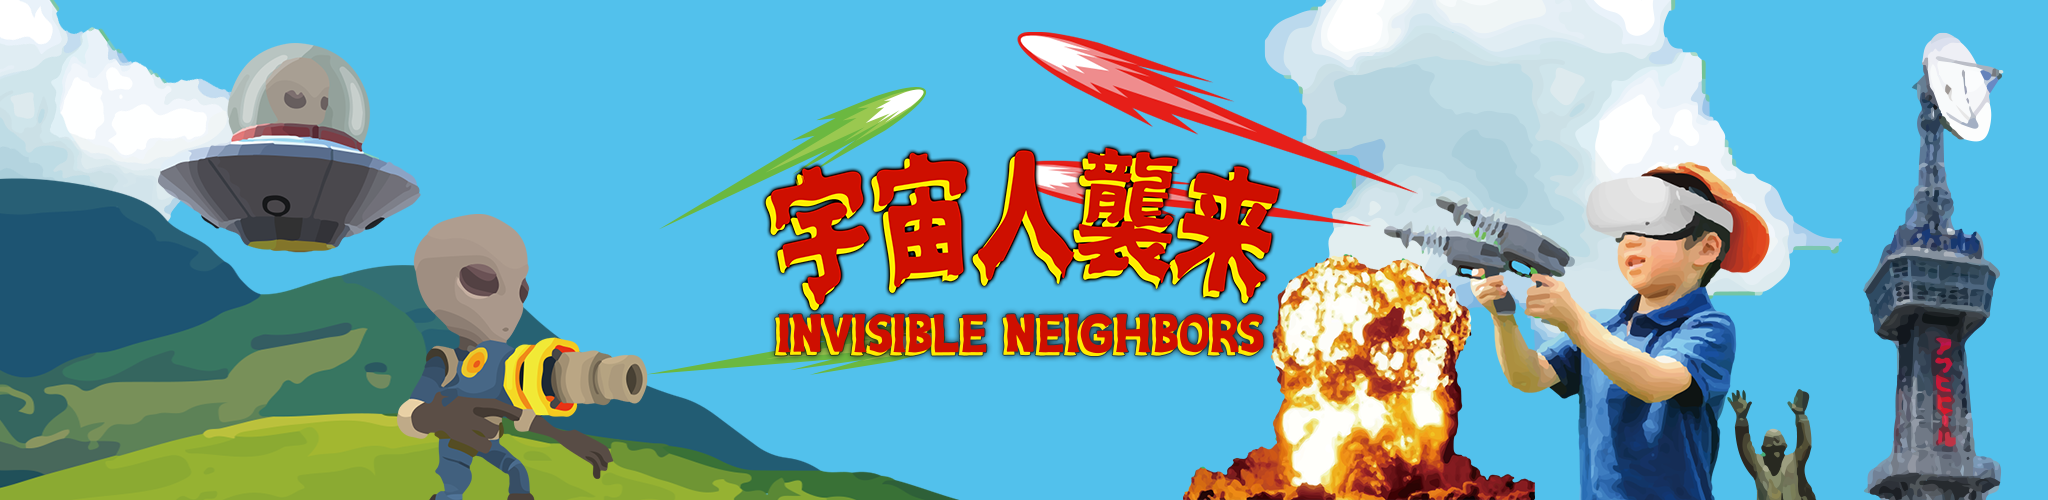 INVISIBLE NEIGHBORS-宇宙人襲来